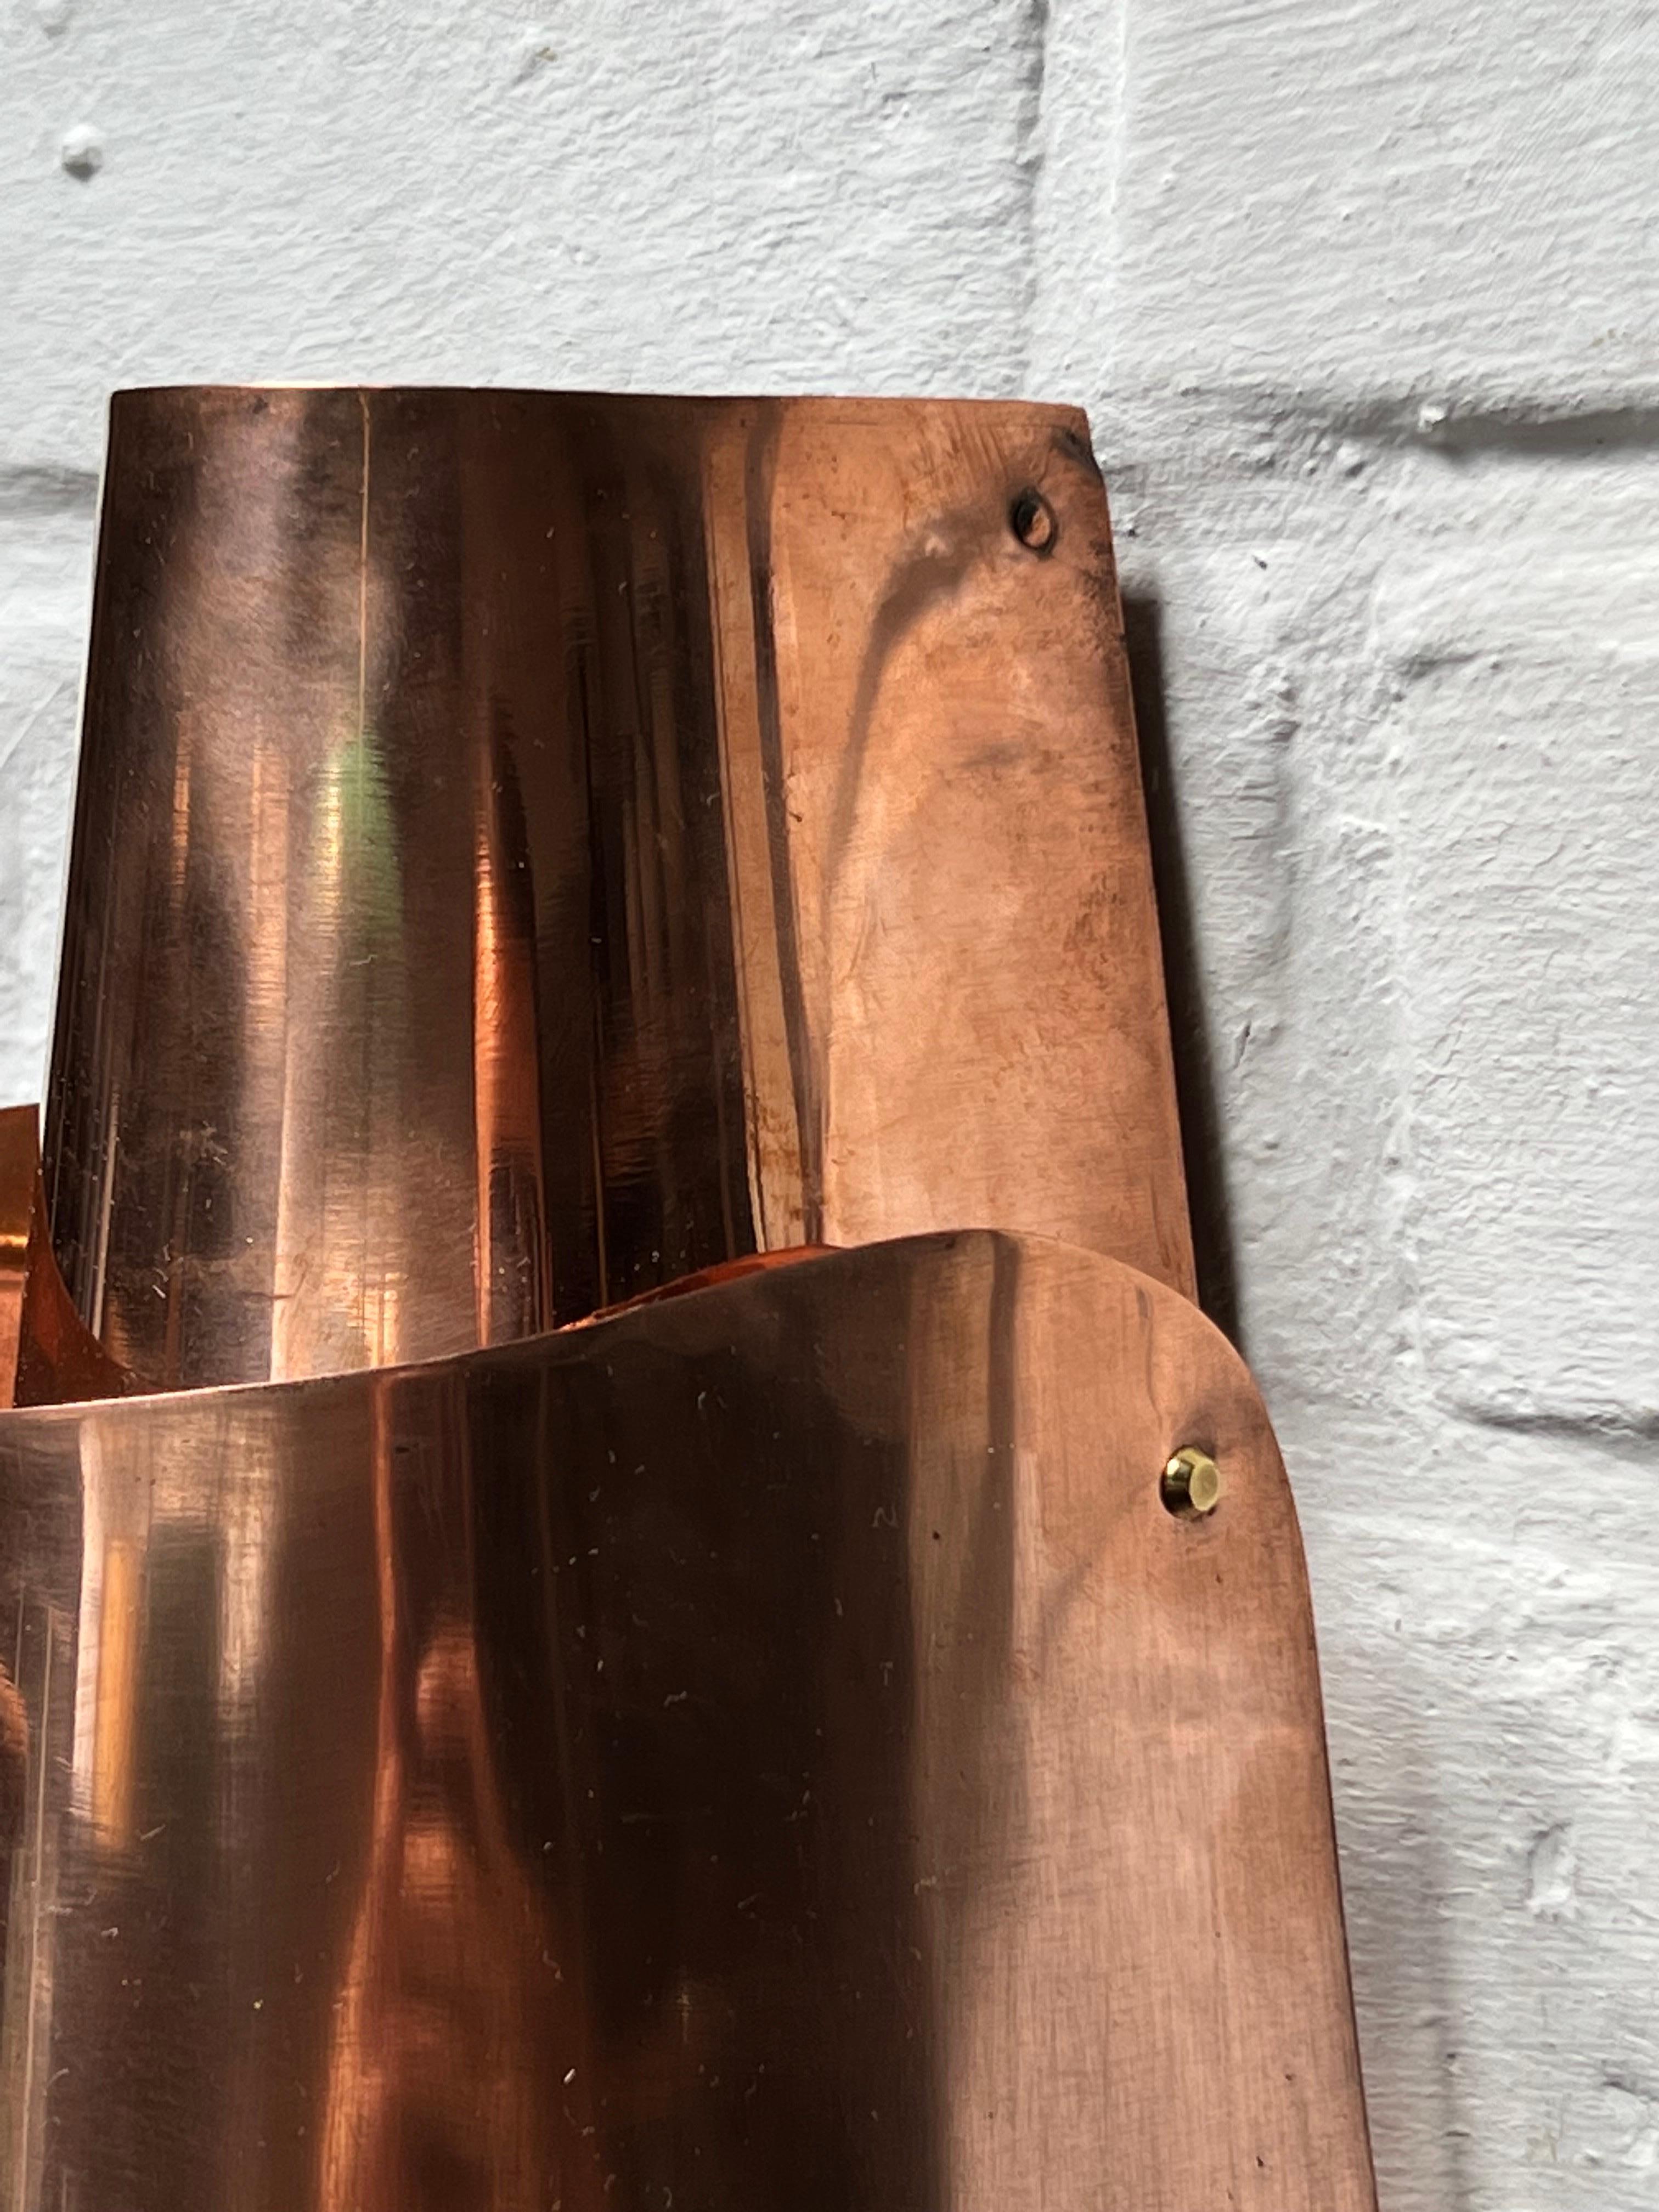 One of a kind copper lamp by Danish architect Bent Karlby. Made for the hotel Osterport.  Produced by Fog and Morup in Denmark. The copper has been cleaned previously in his life but it aging again. With time it will get more patinated. Made of 4